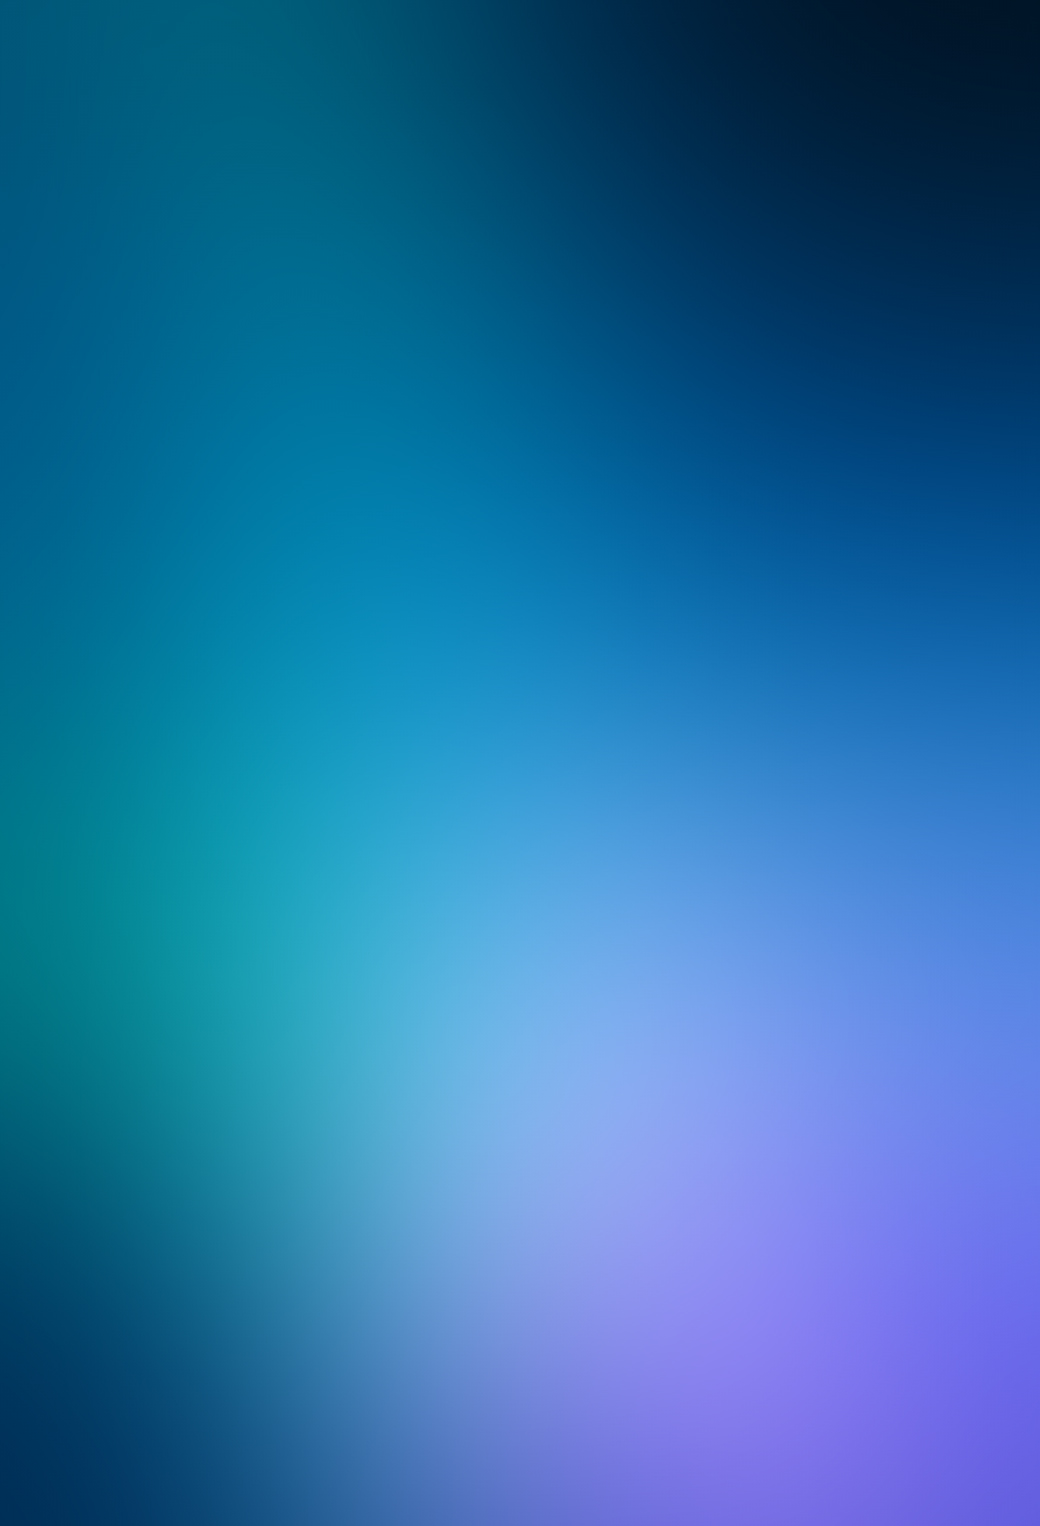 20 Parallax Ios 7 Wallpapers For Iphone Ready To Download